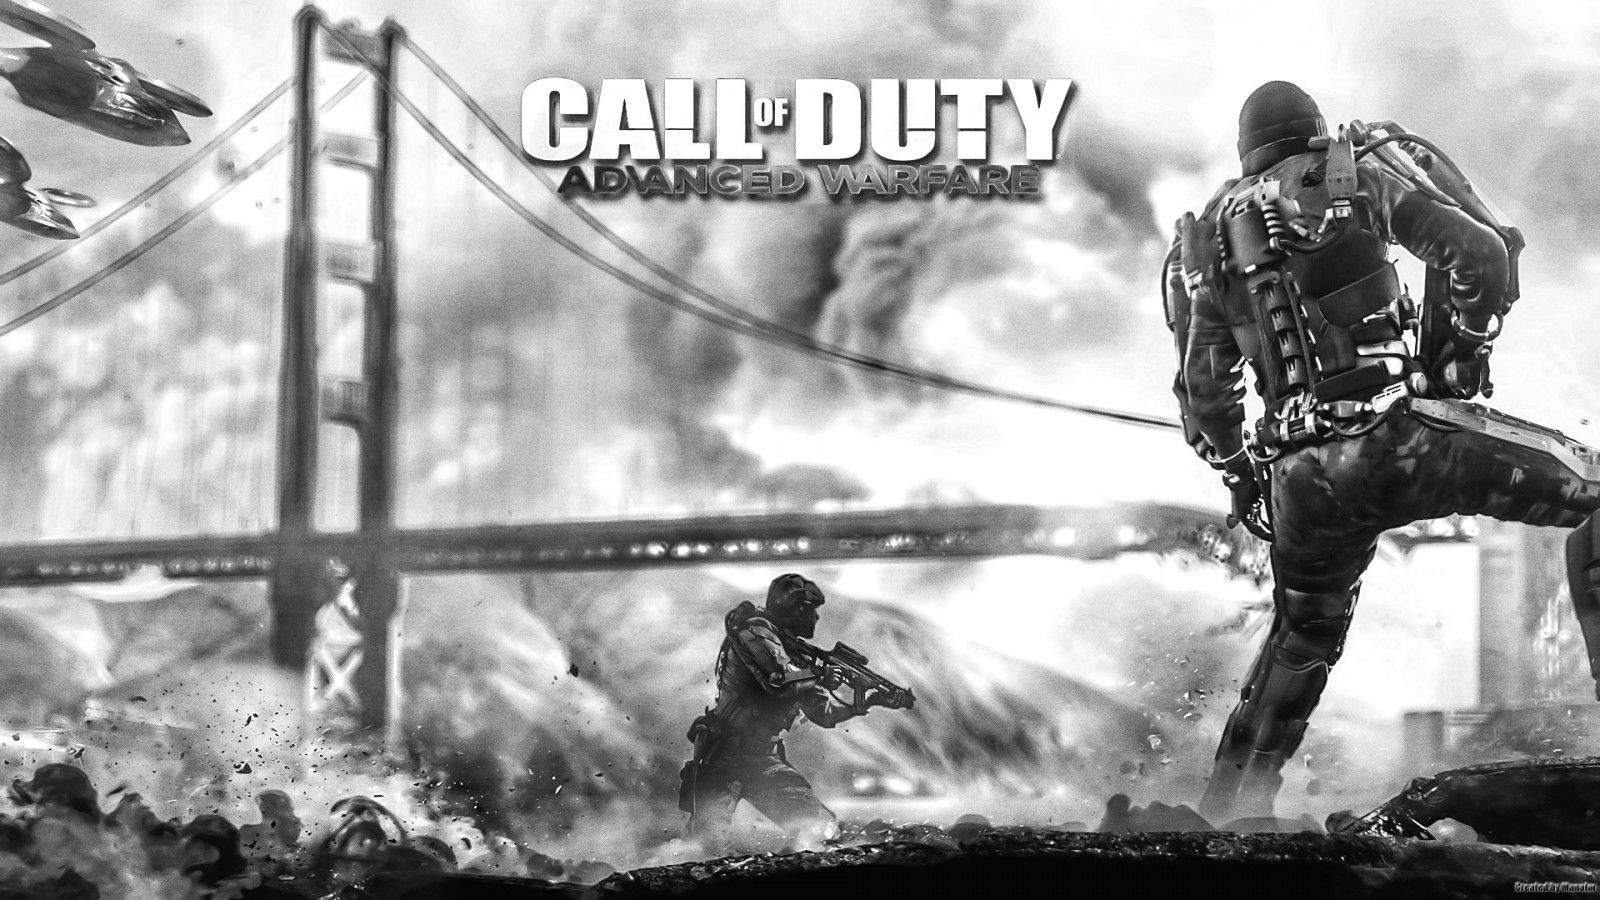 Wallpaper, video games, Call of Duty, video game characters, Call of Duty Advanced Warfare, black and white, monochrome photography 1920x1080